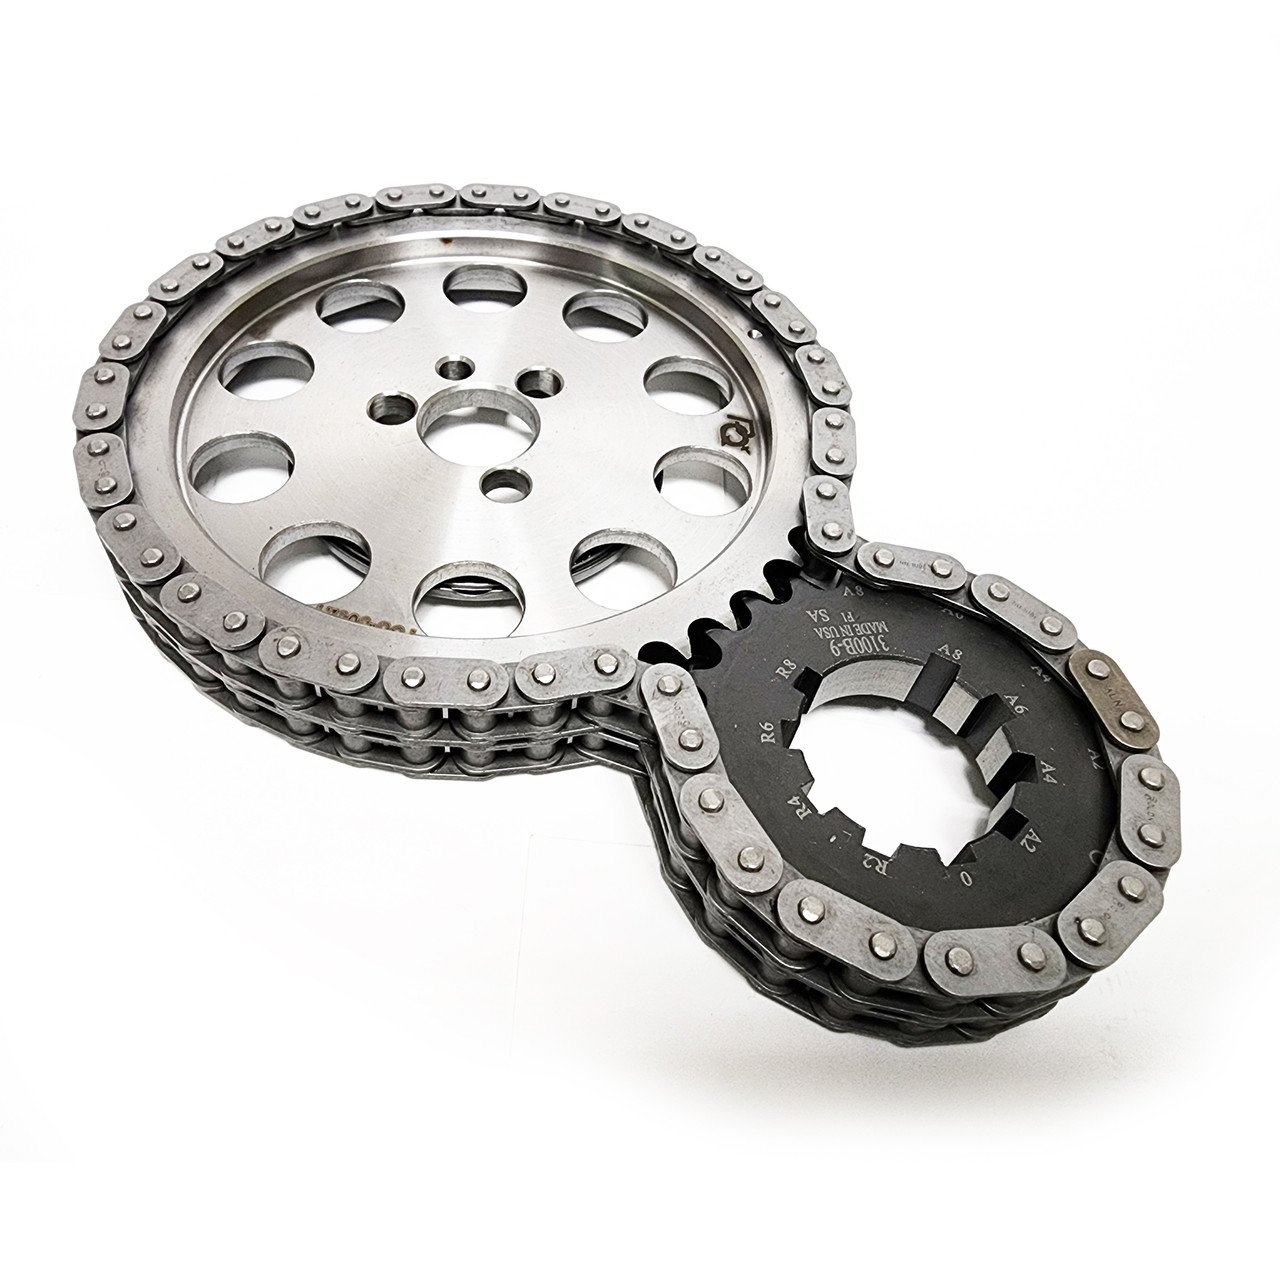 Double-Roller Timing Chain and Gear Set for Chevy